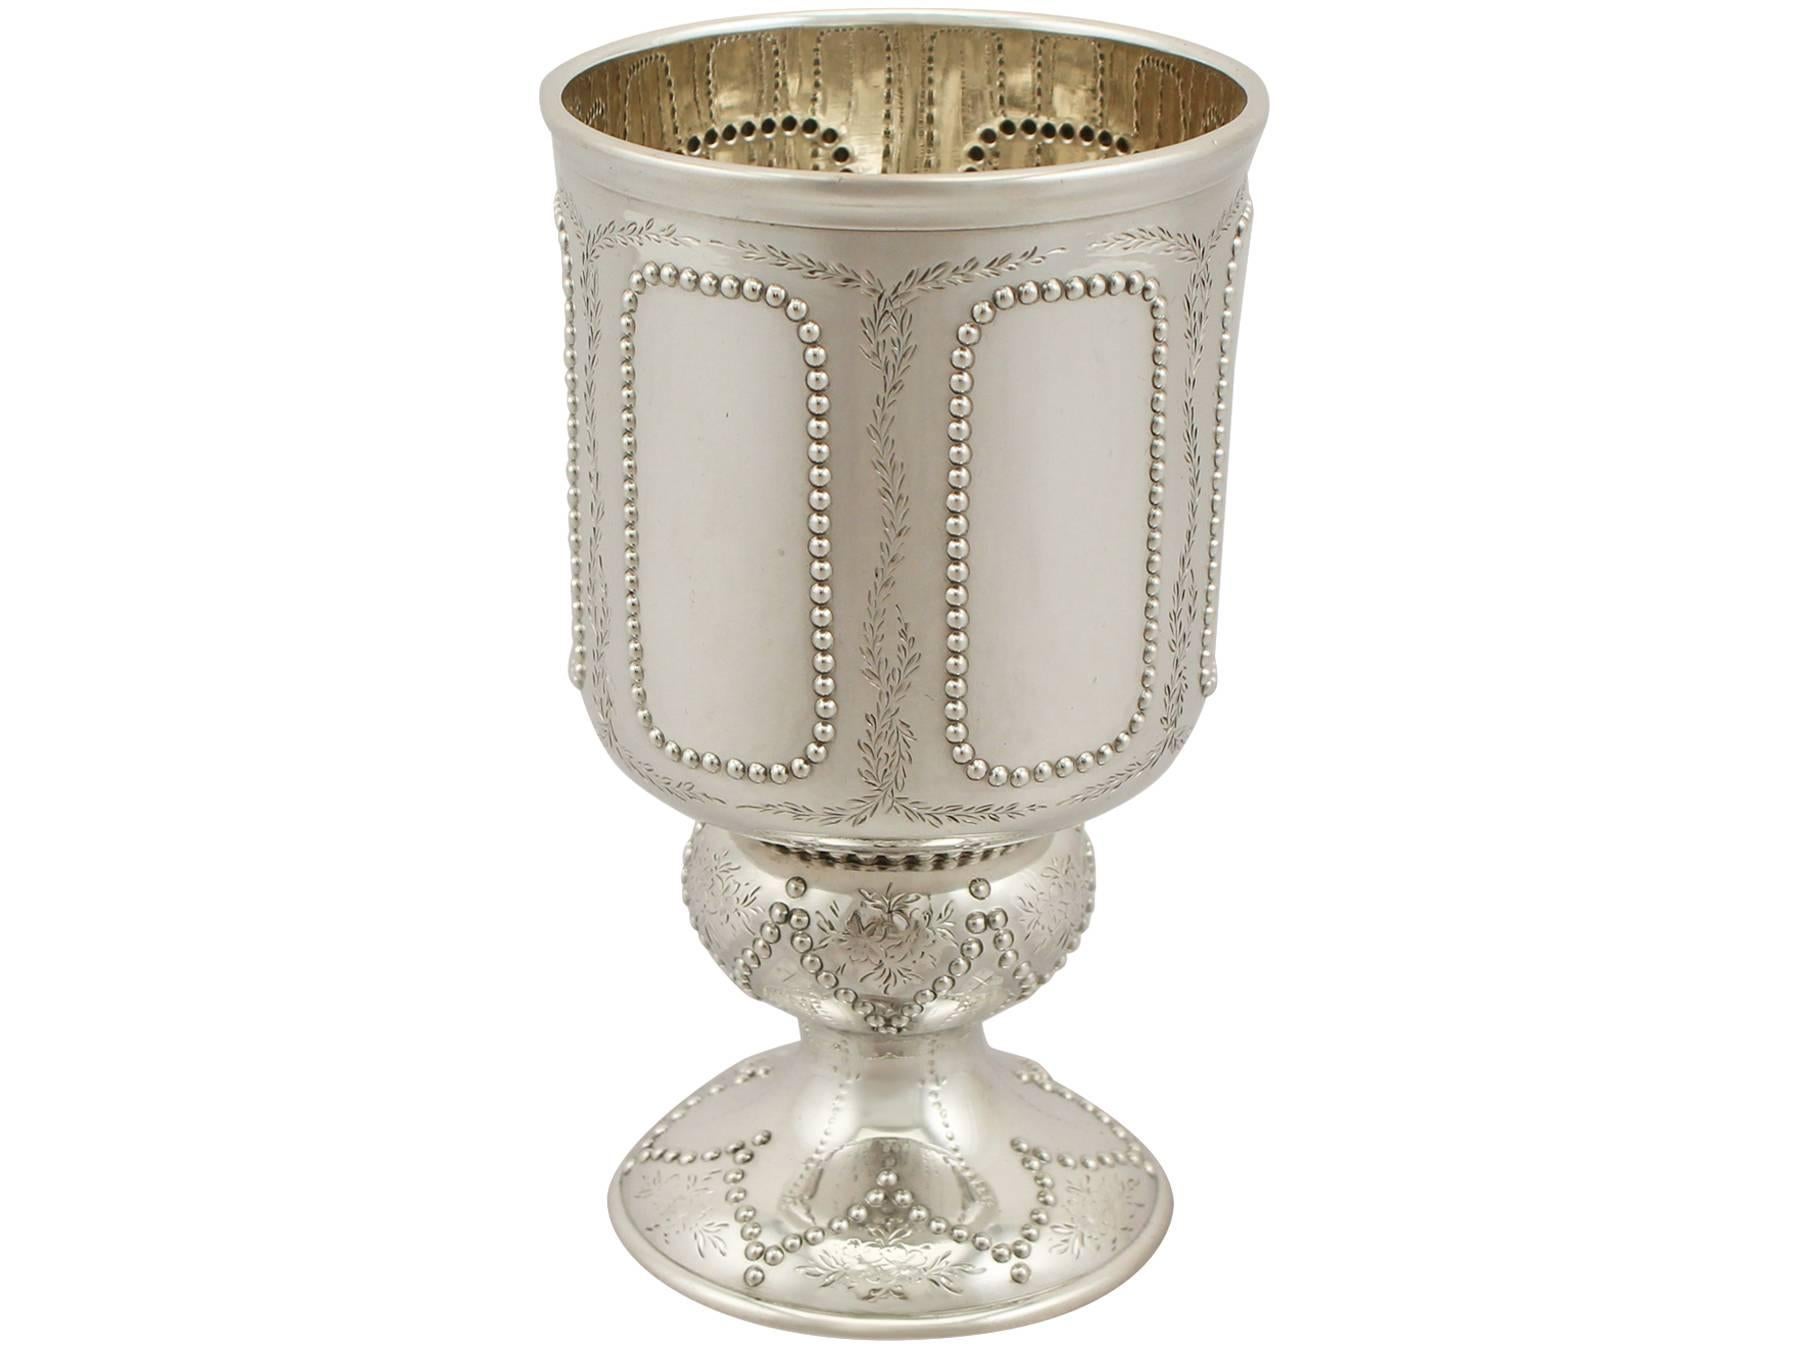 An exceptional, fine and impressive antique Victorian English sterling silver goblet in the Arts and Crafts style; an addition to our wine and drinks related silverware collection.

This exceptional antique Victorian sterling silver goblet has a